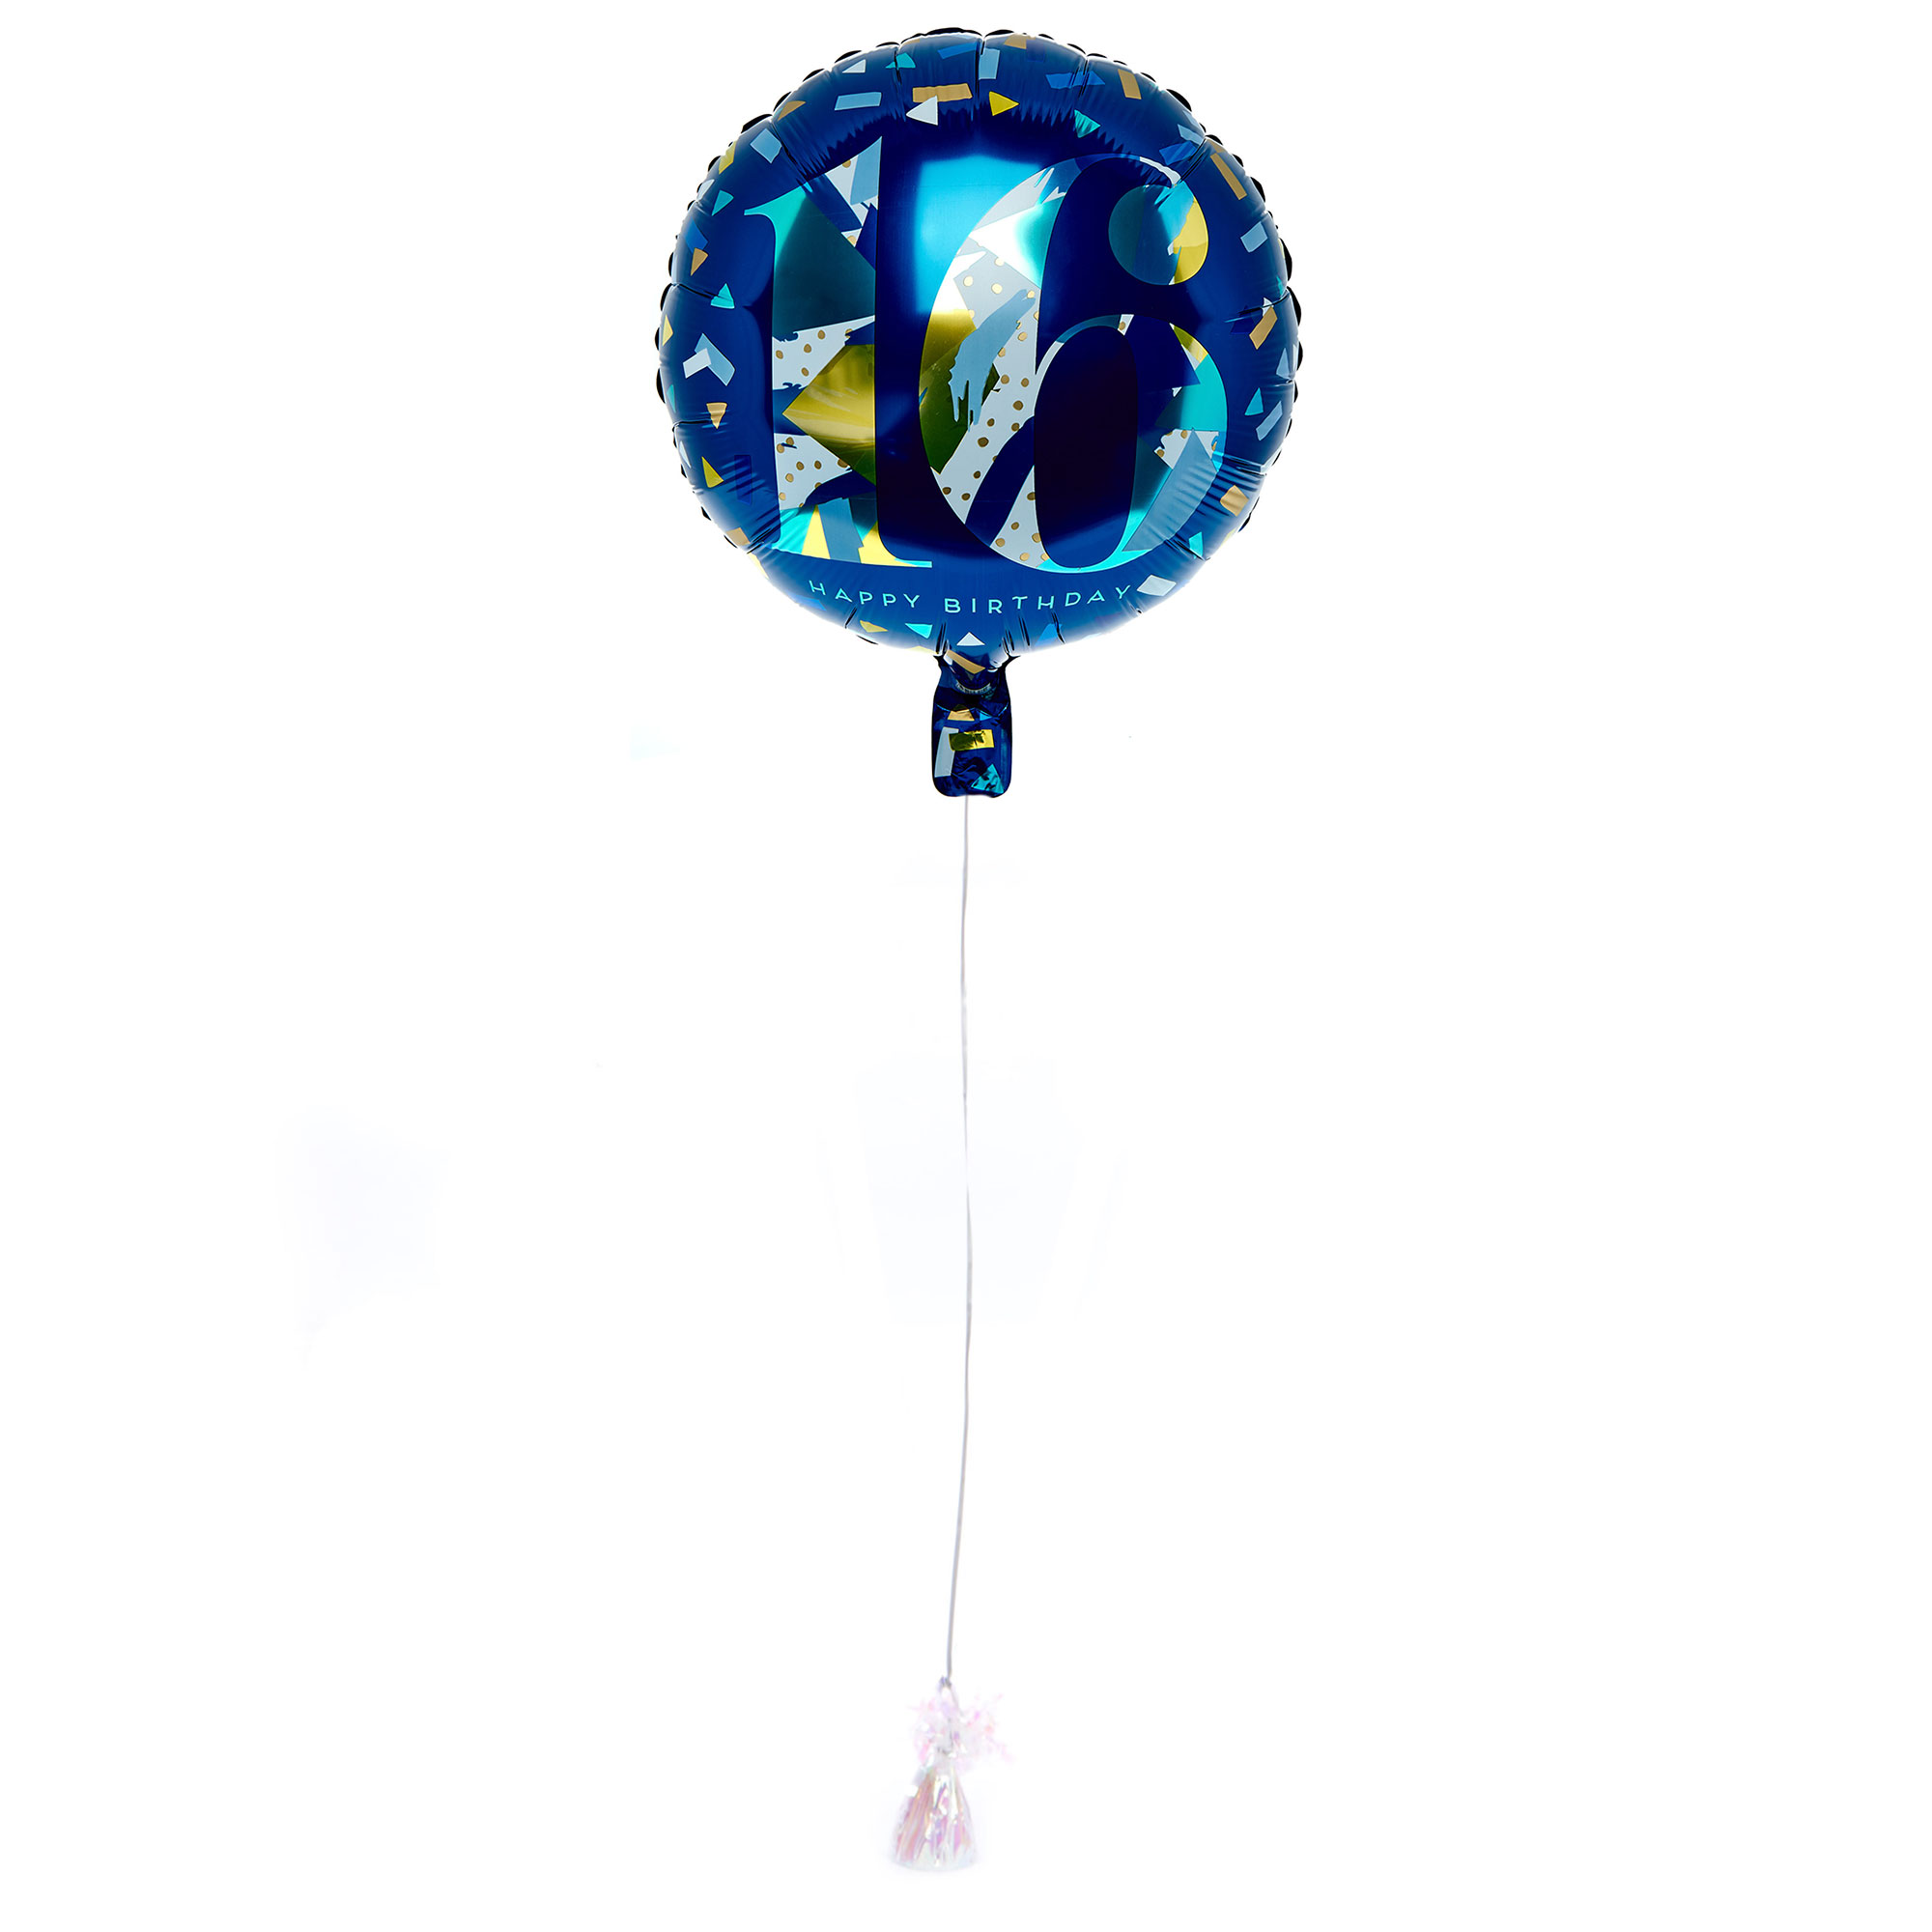 Blue & Gold 16th Birthday Balloon & Lindt Chocolate Box - FREE GIFT CARD!